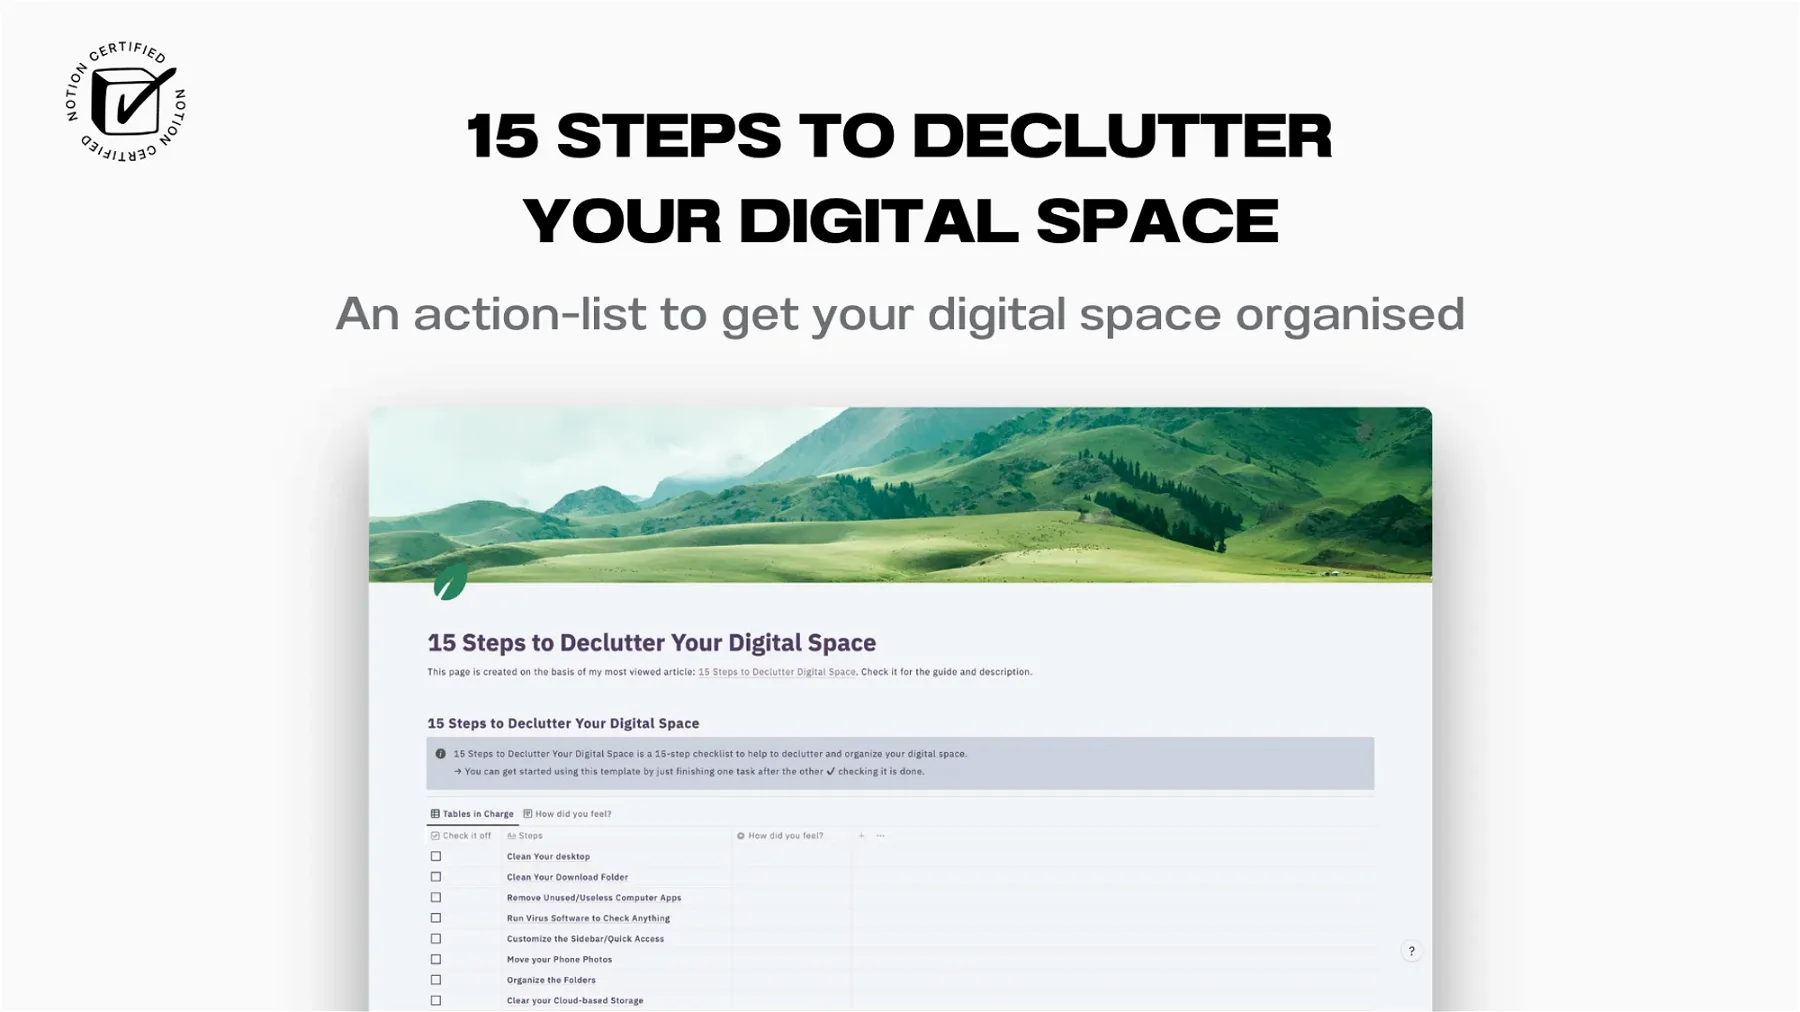 15 Steps to Declutter Your Digital Space